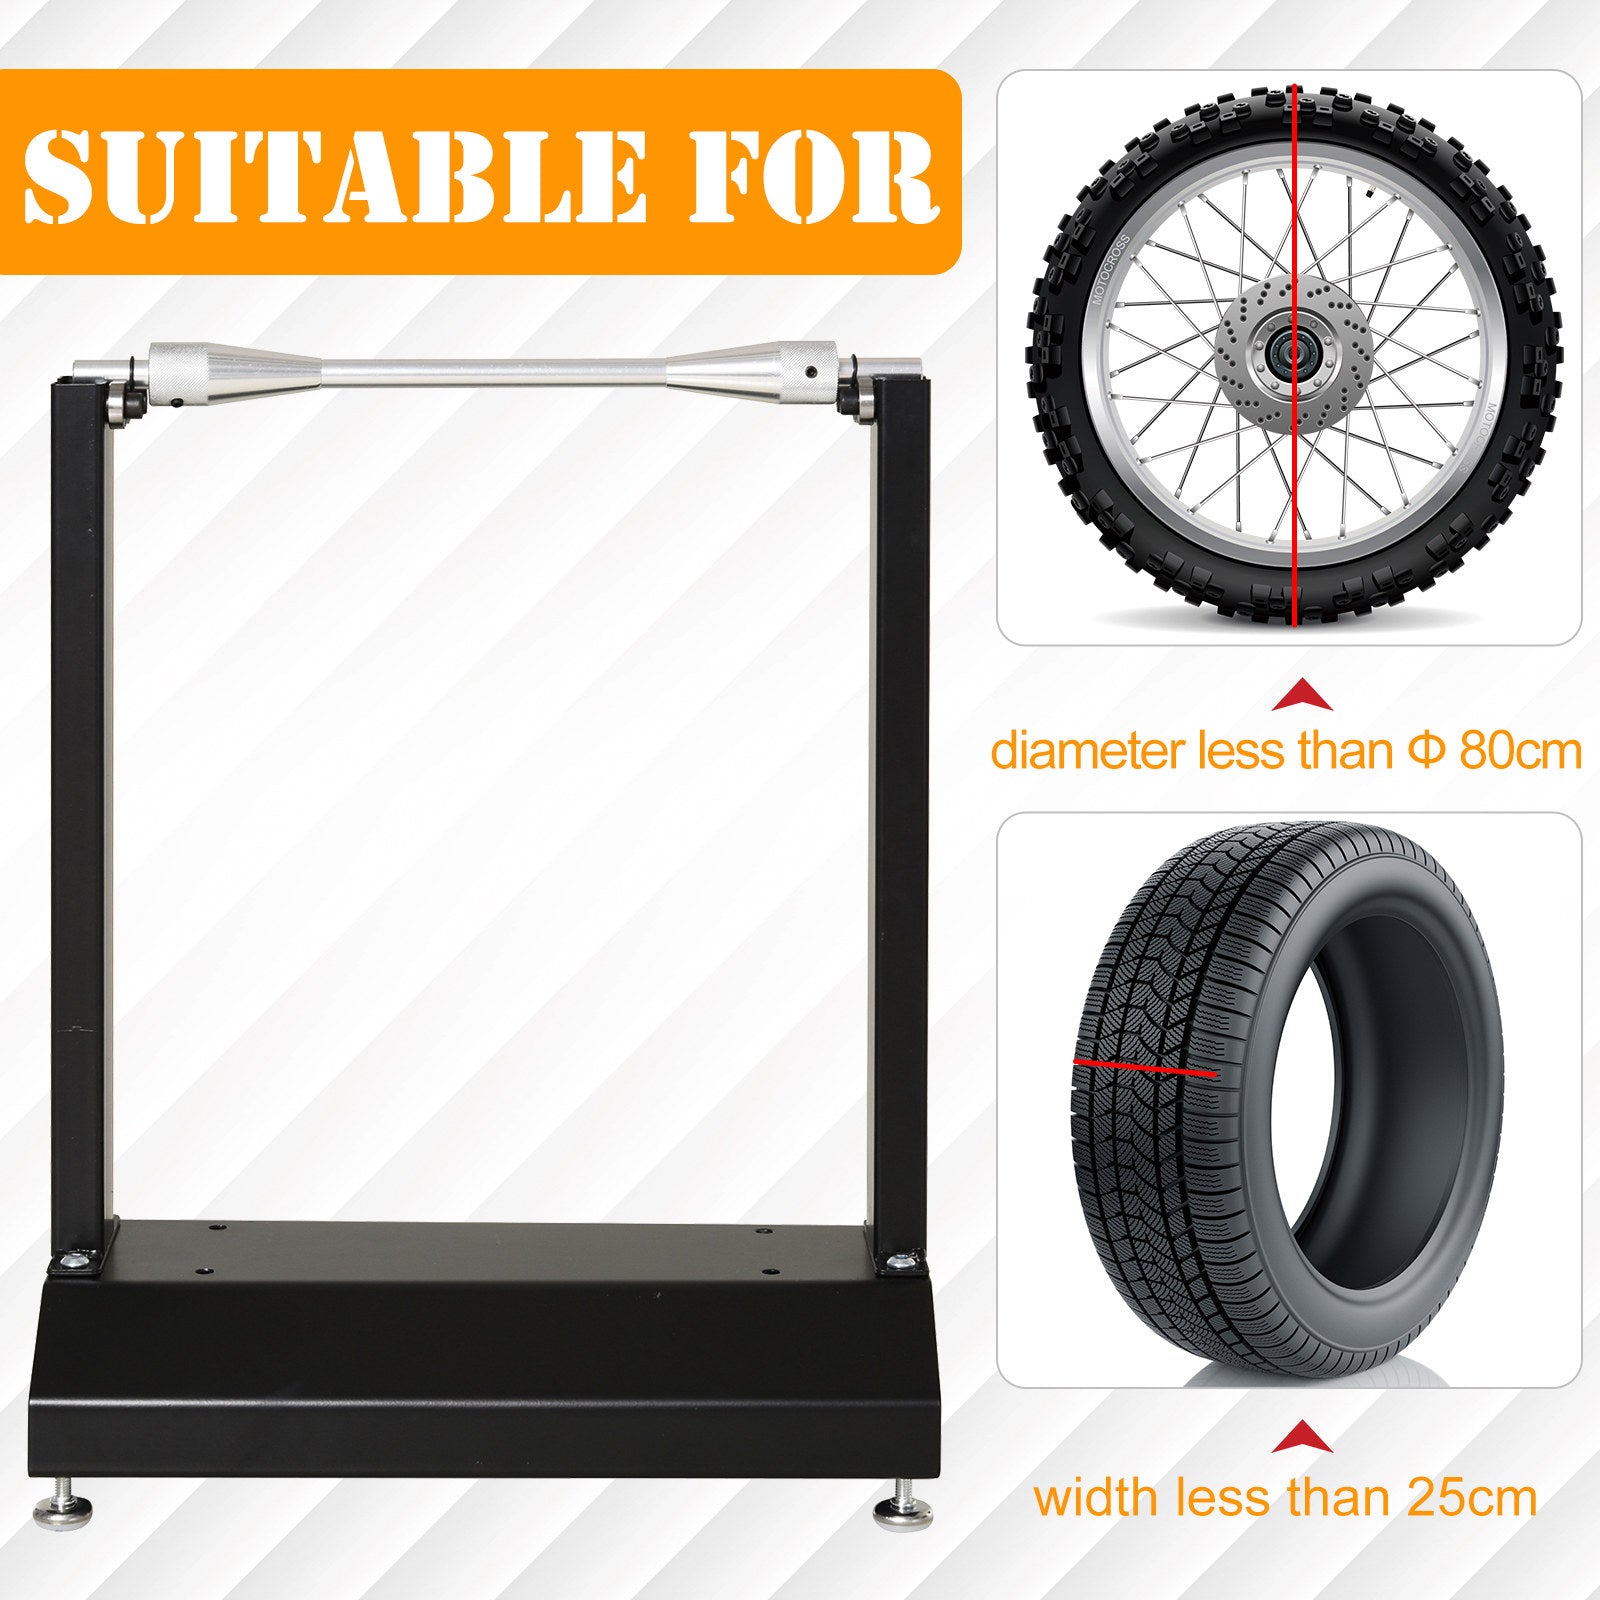 DURHAND Motorcycle / Bicycle Wheel Lifting Balance Stand, Motorbike Portable Stand, Rotating Adjustment Wheel